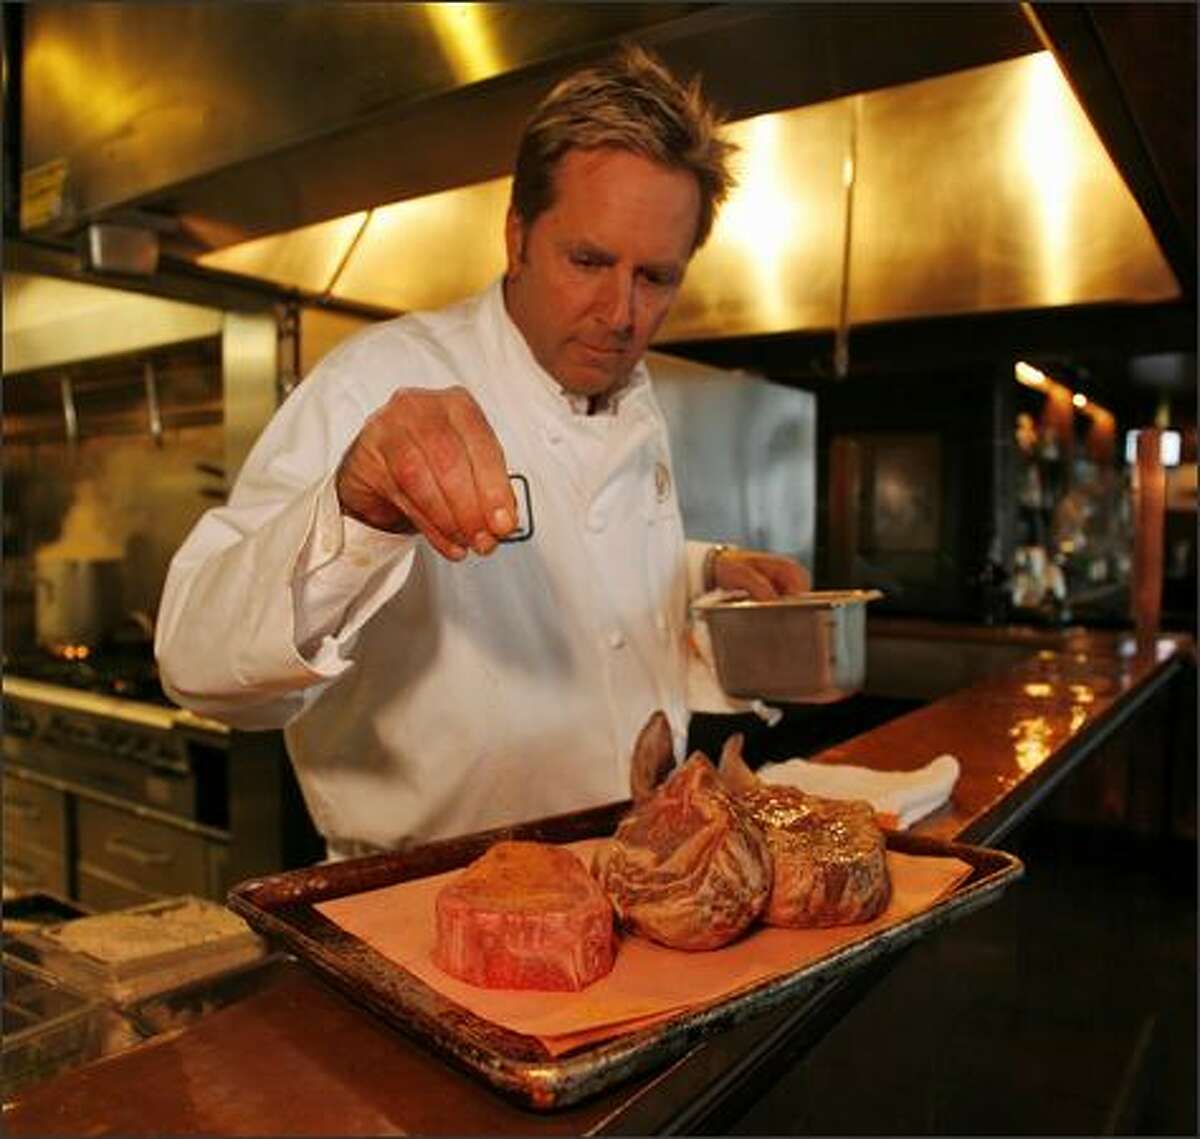 Executive chef Bradley Dickinson prepares a pair of "tomahawk chops" and a Delmonico steak at Daniel's Broiler at Leschi. Every cut is USDA prime beef, down to the delicious filet mignon steak strips appetizer.